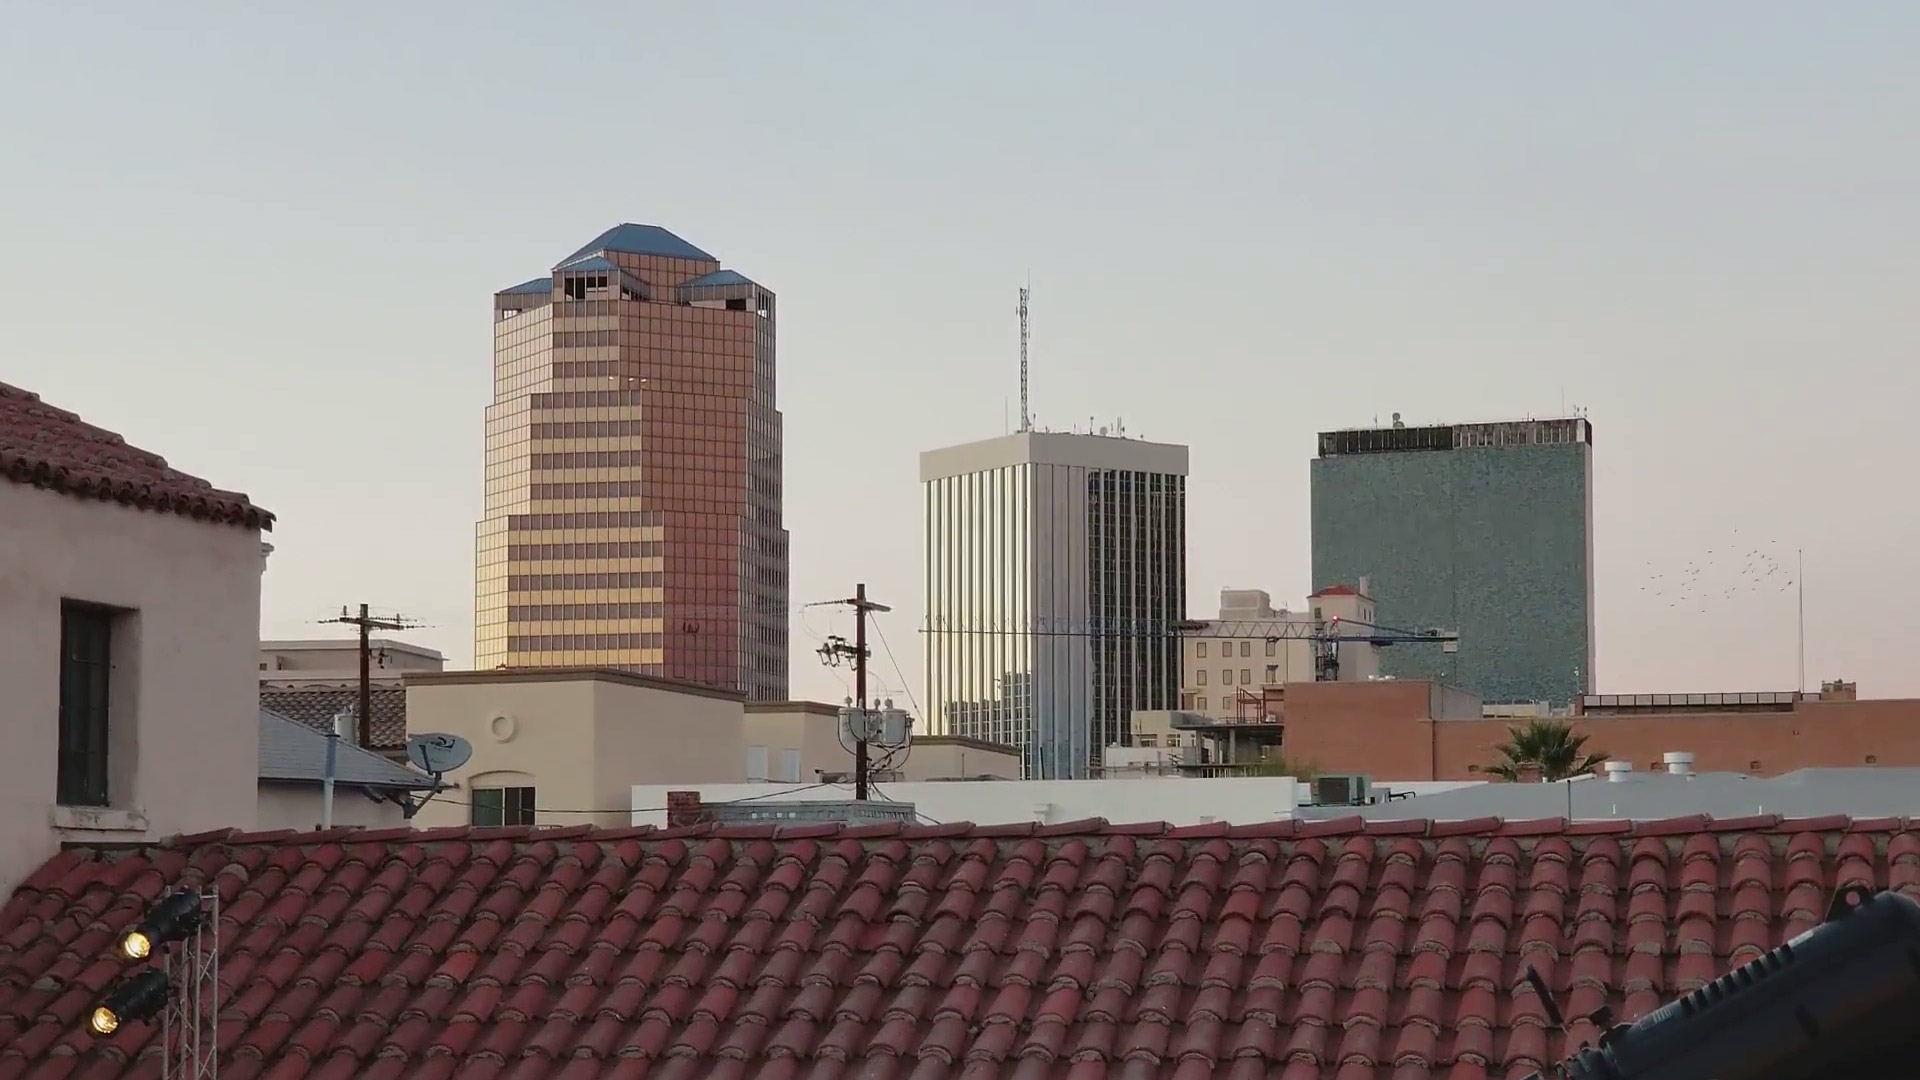 A view of buildings in downtown Tucson from the Temple of Music and Art, January 2018.